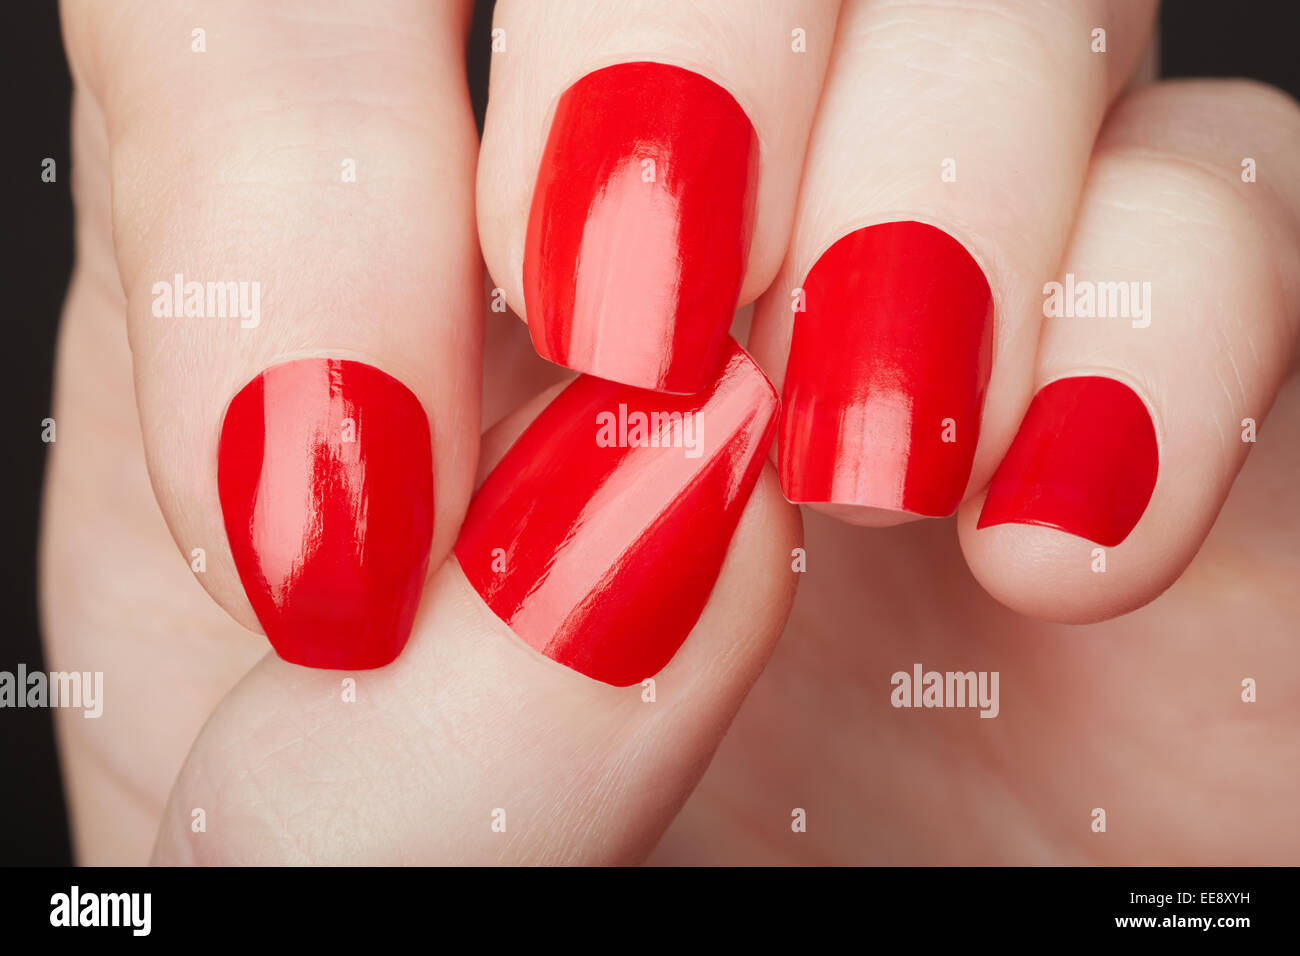 Female hands with red nail polish close up Stock Photo